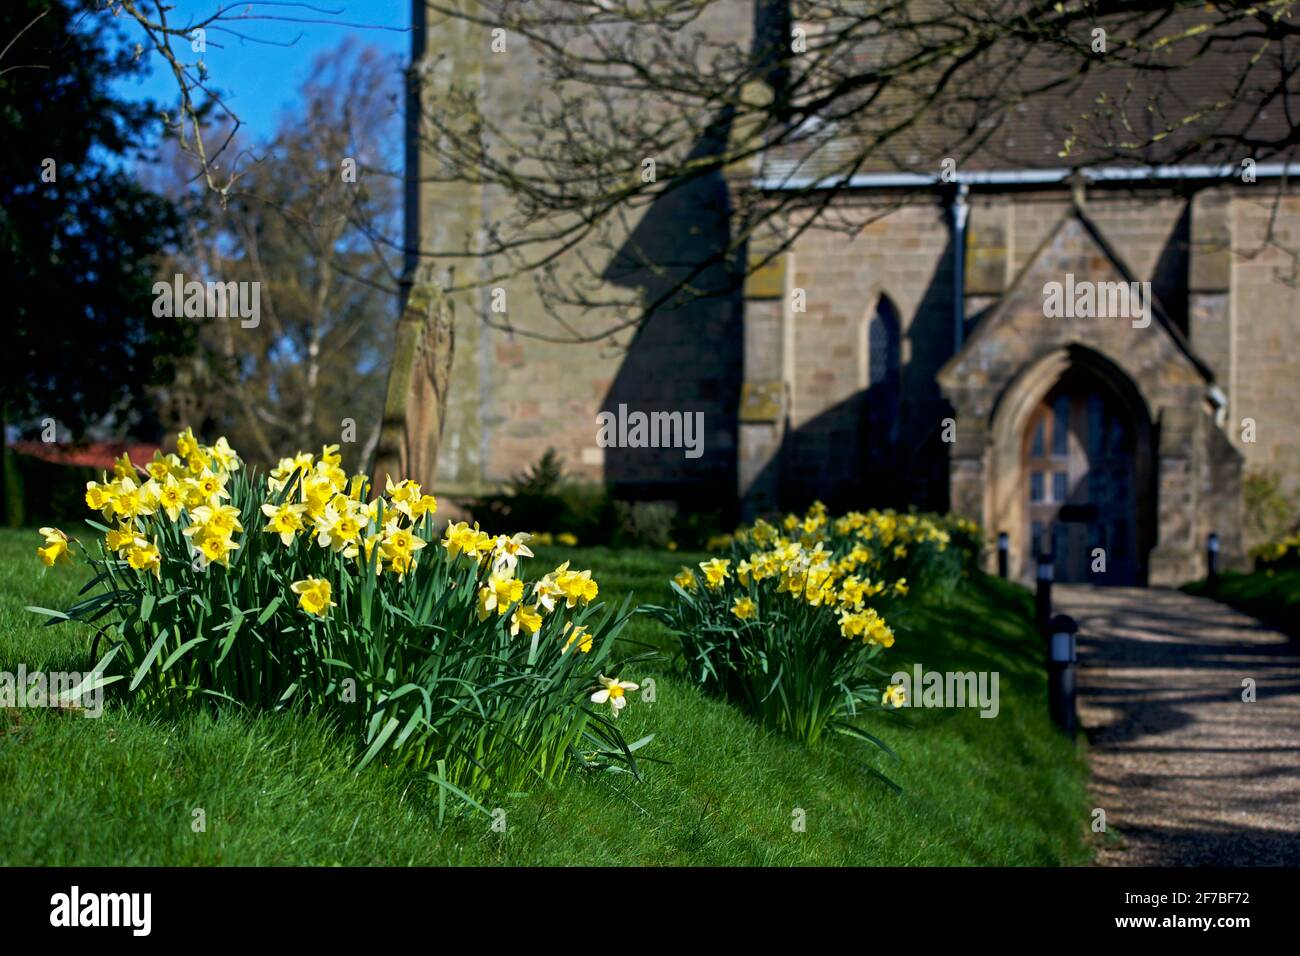 A display of spring daffodils in the churchyard of All Saints church in the village of Lund, East Yorkshire, England UK Stock Photo